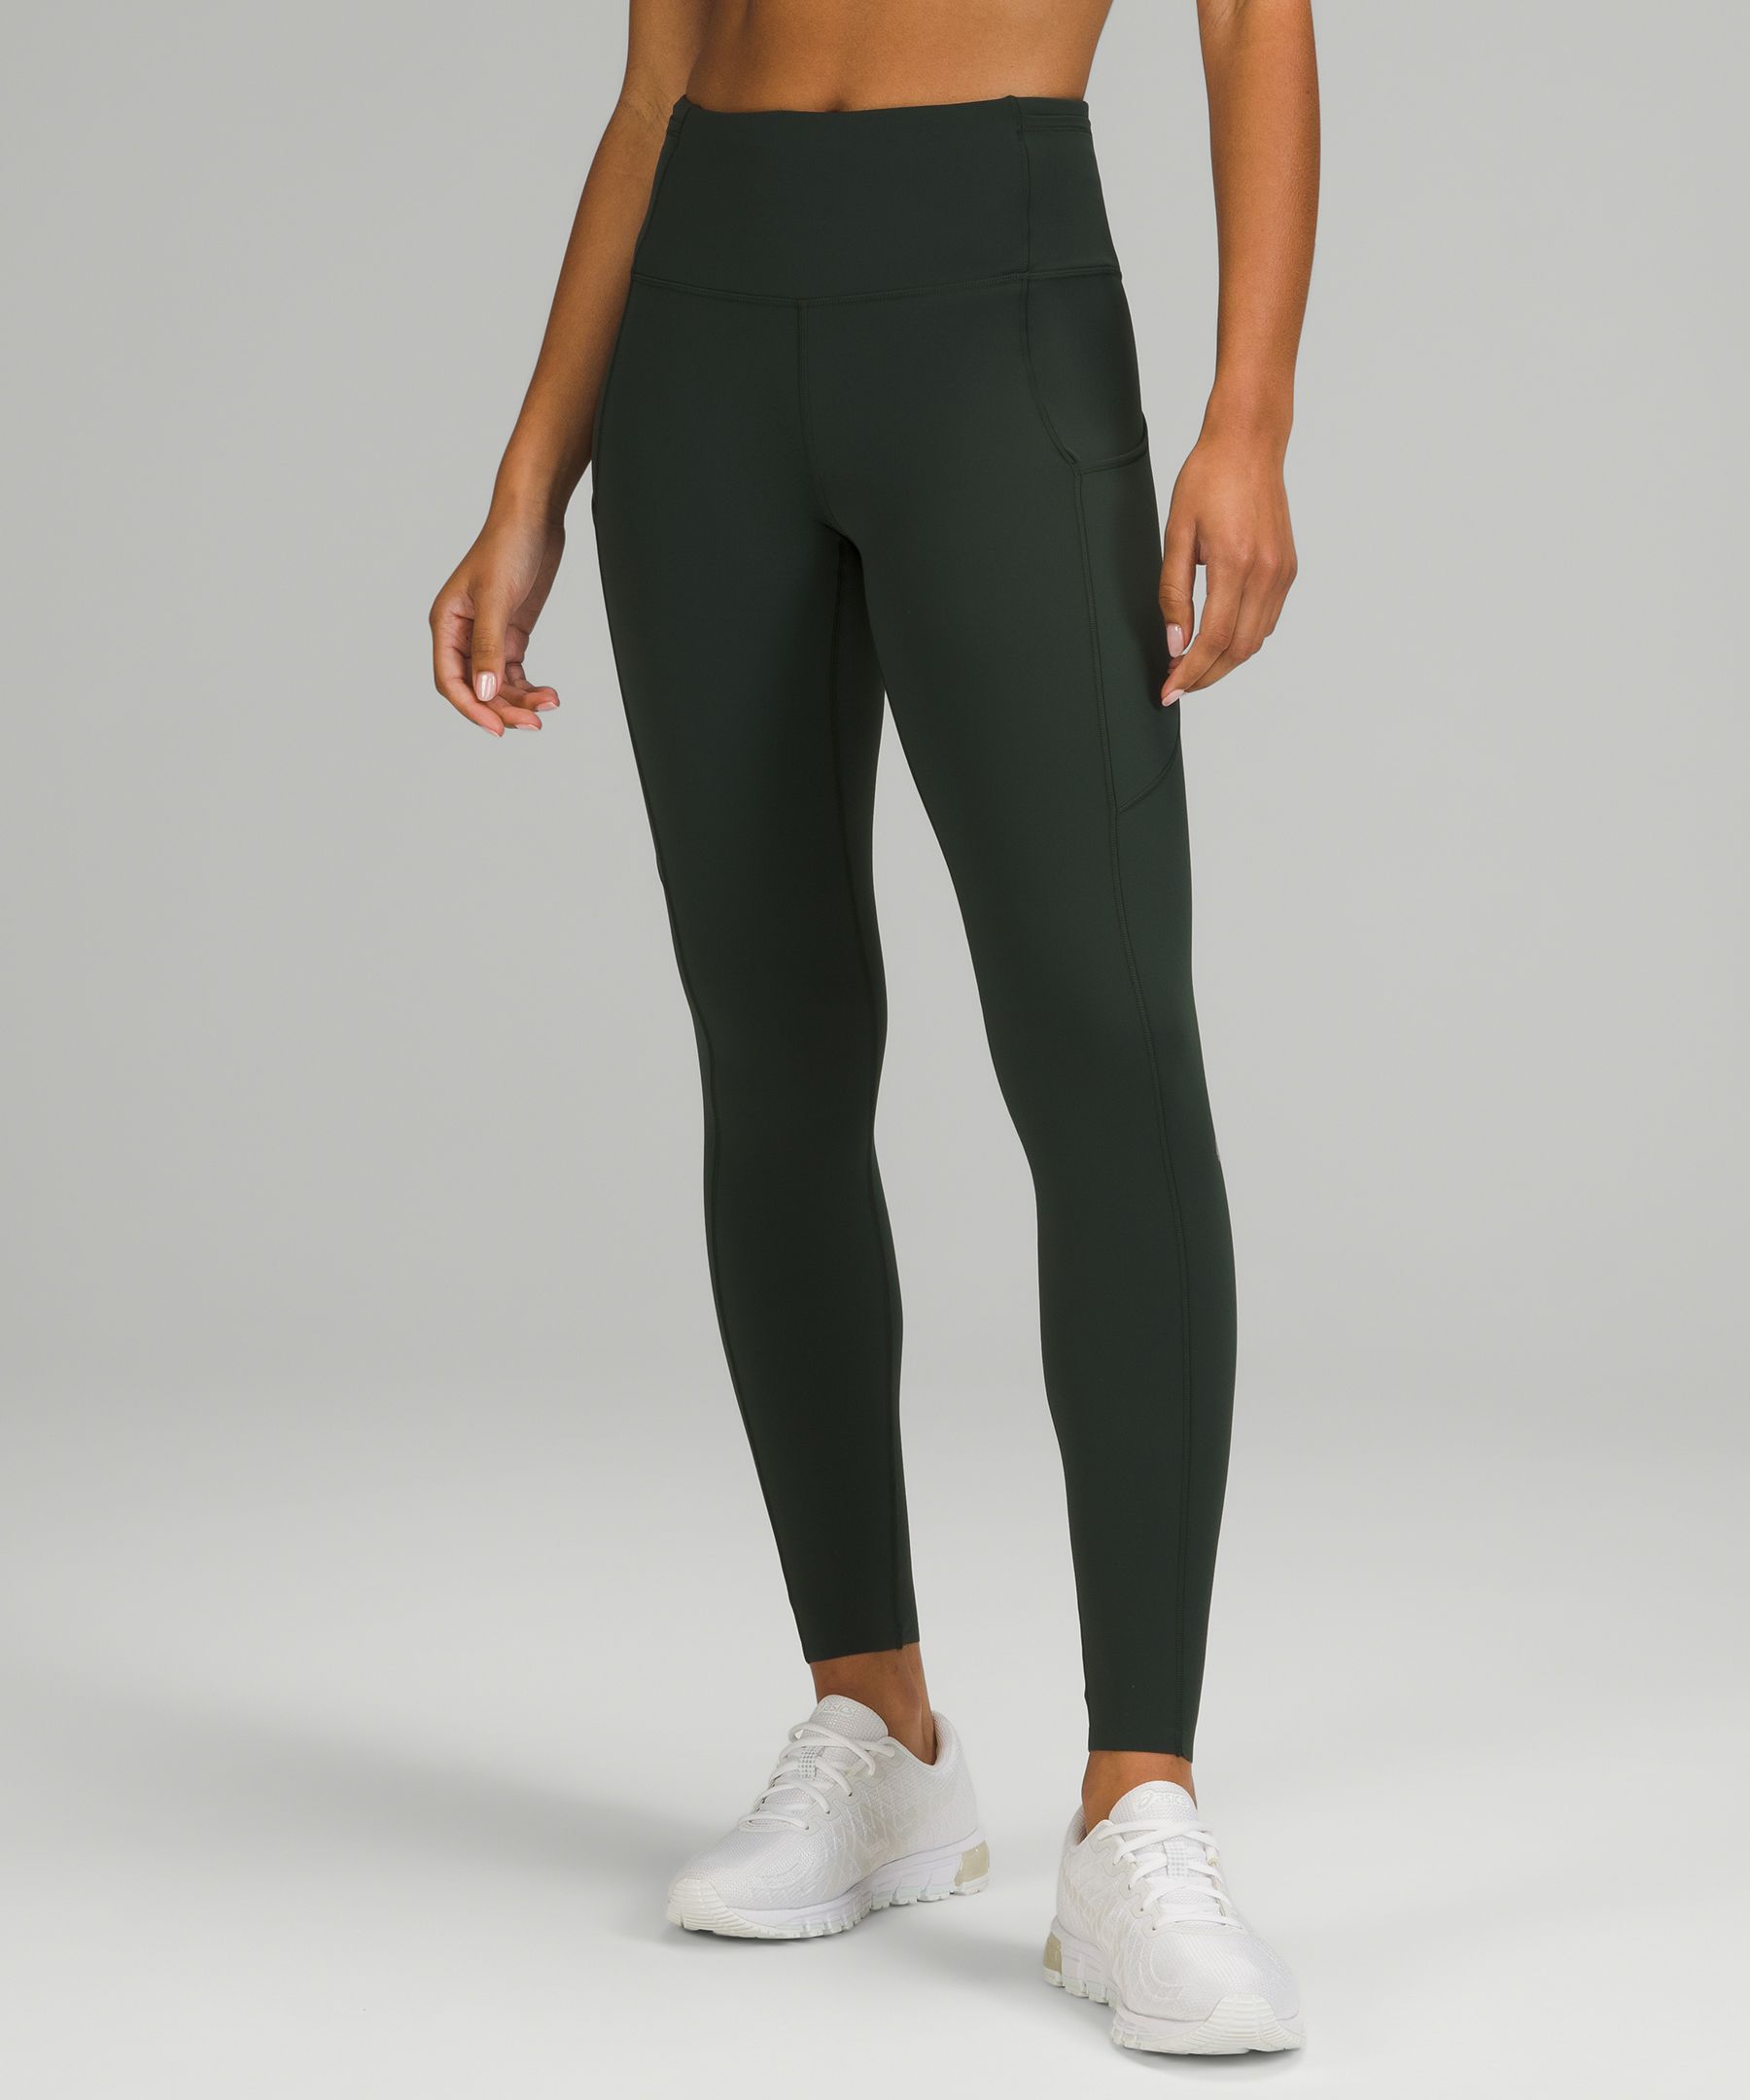 Lululemon Fast And Free Brushed Fabric High-rise Tights 28" In Rainforest Green